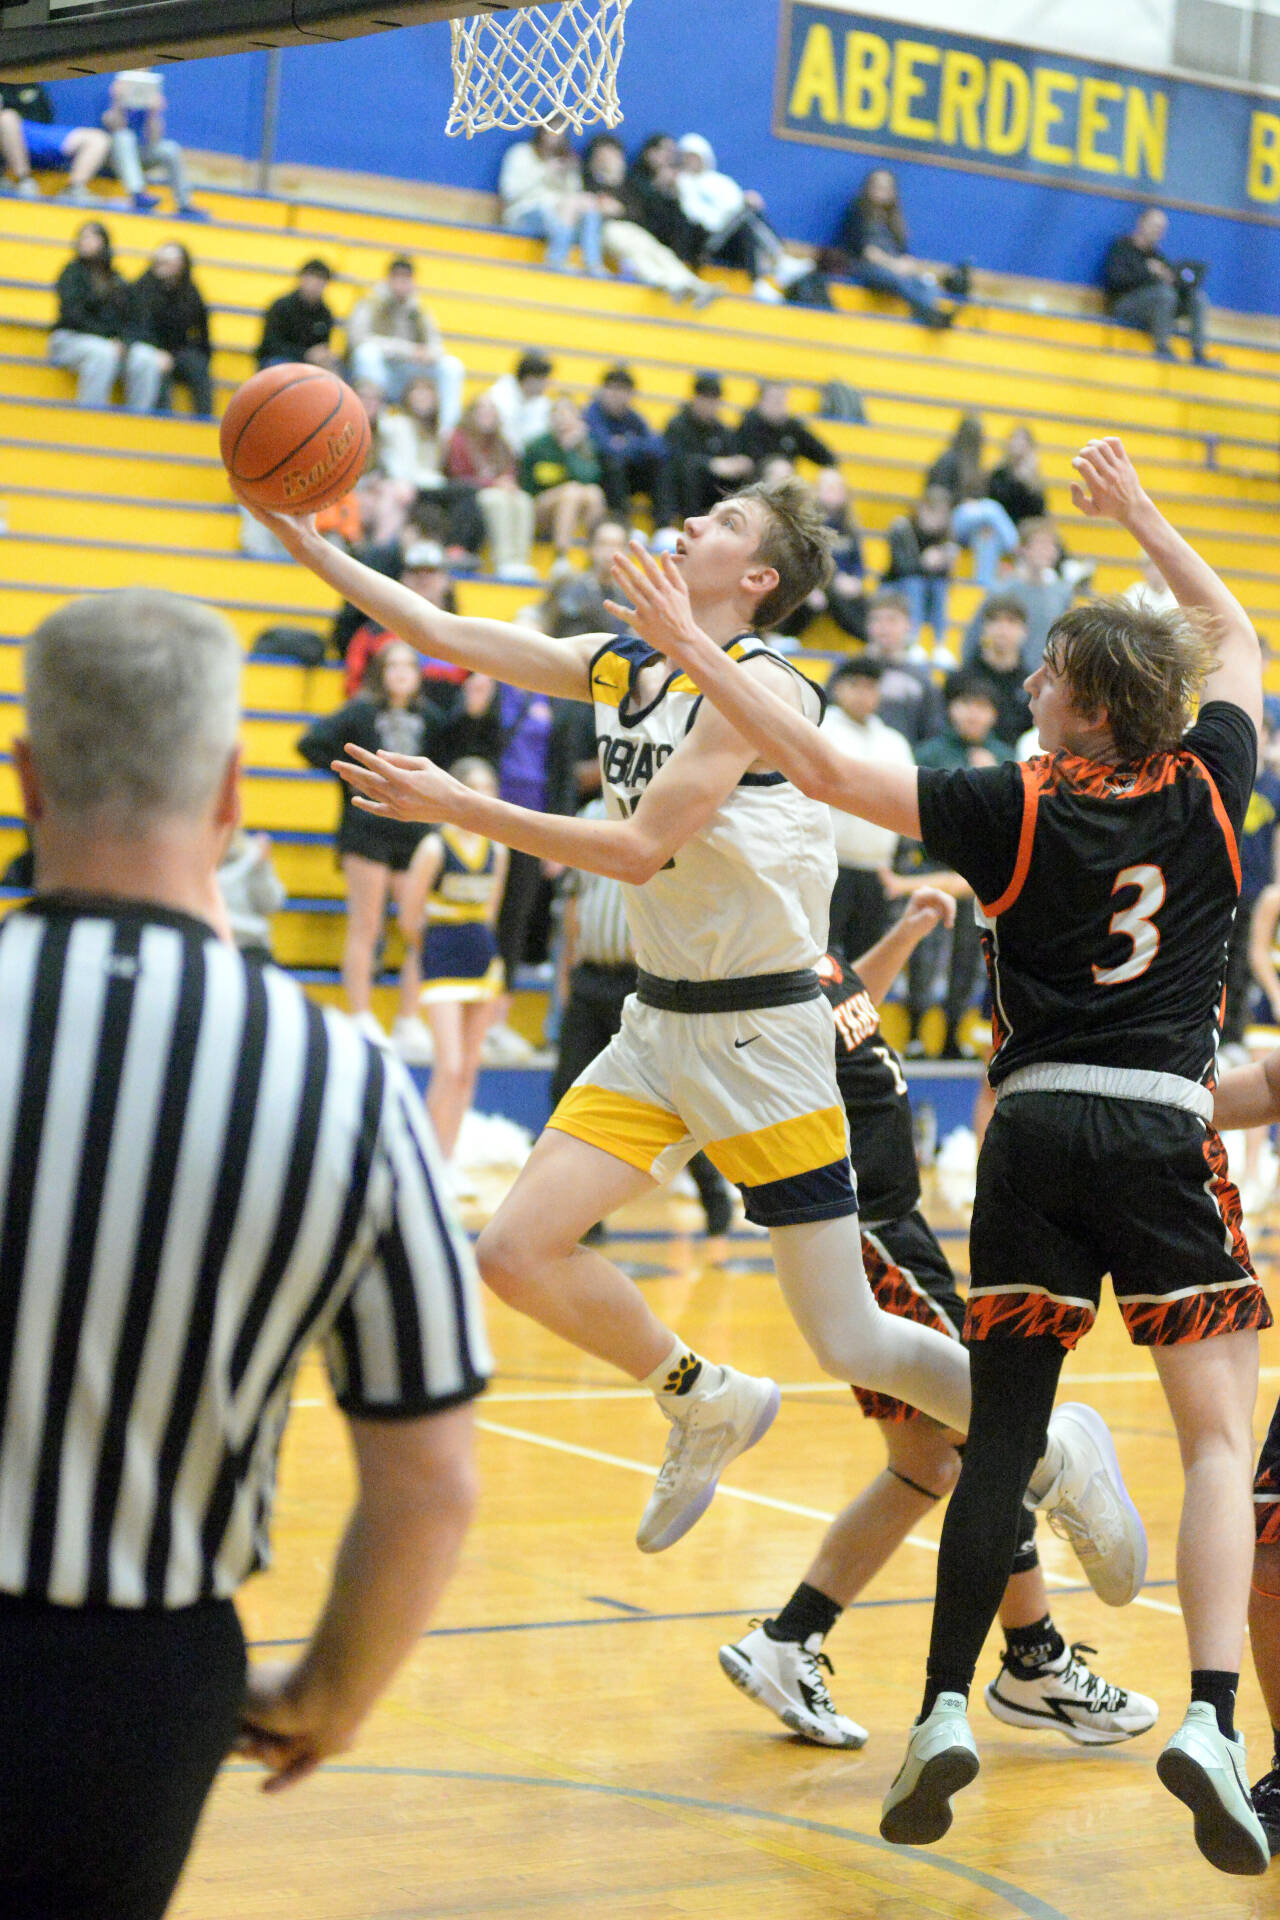 RYAN SPARKS / THE DAILY WORLD 
Aberdeen’s Baylor Ainsworth, left, scores two of his 10 first-half points in the Bobcats 50-49 win over Centralia on Tuesday in Aberdeen.